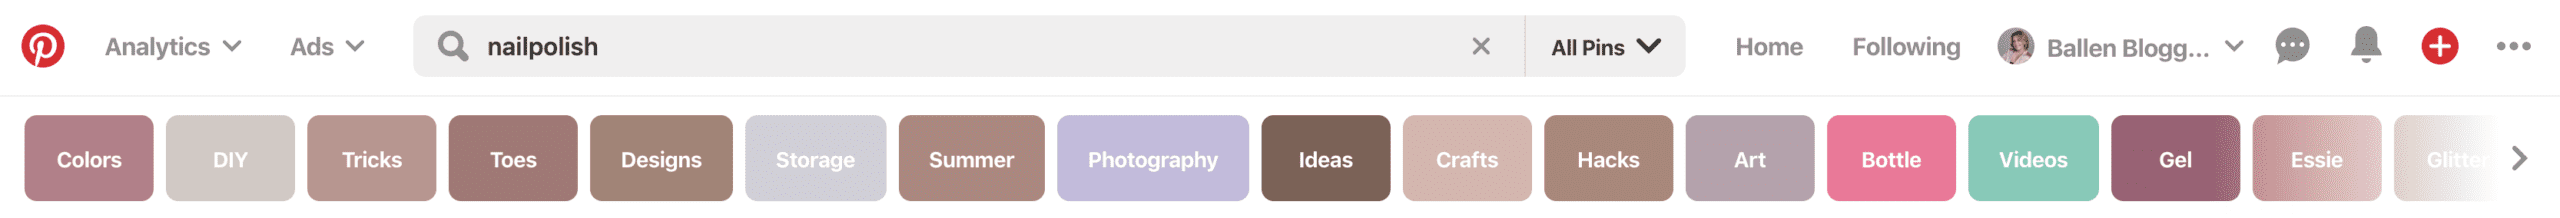 Pinterest Search with categories that would make good board names